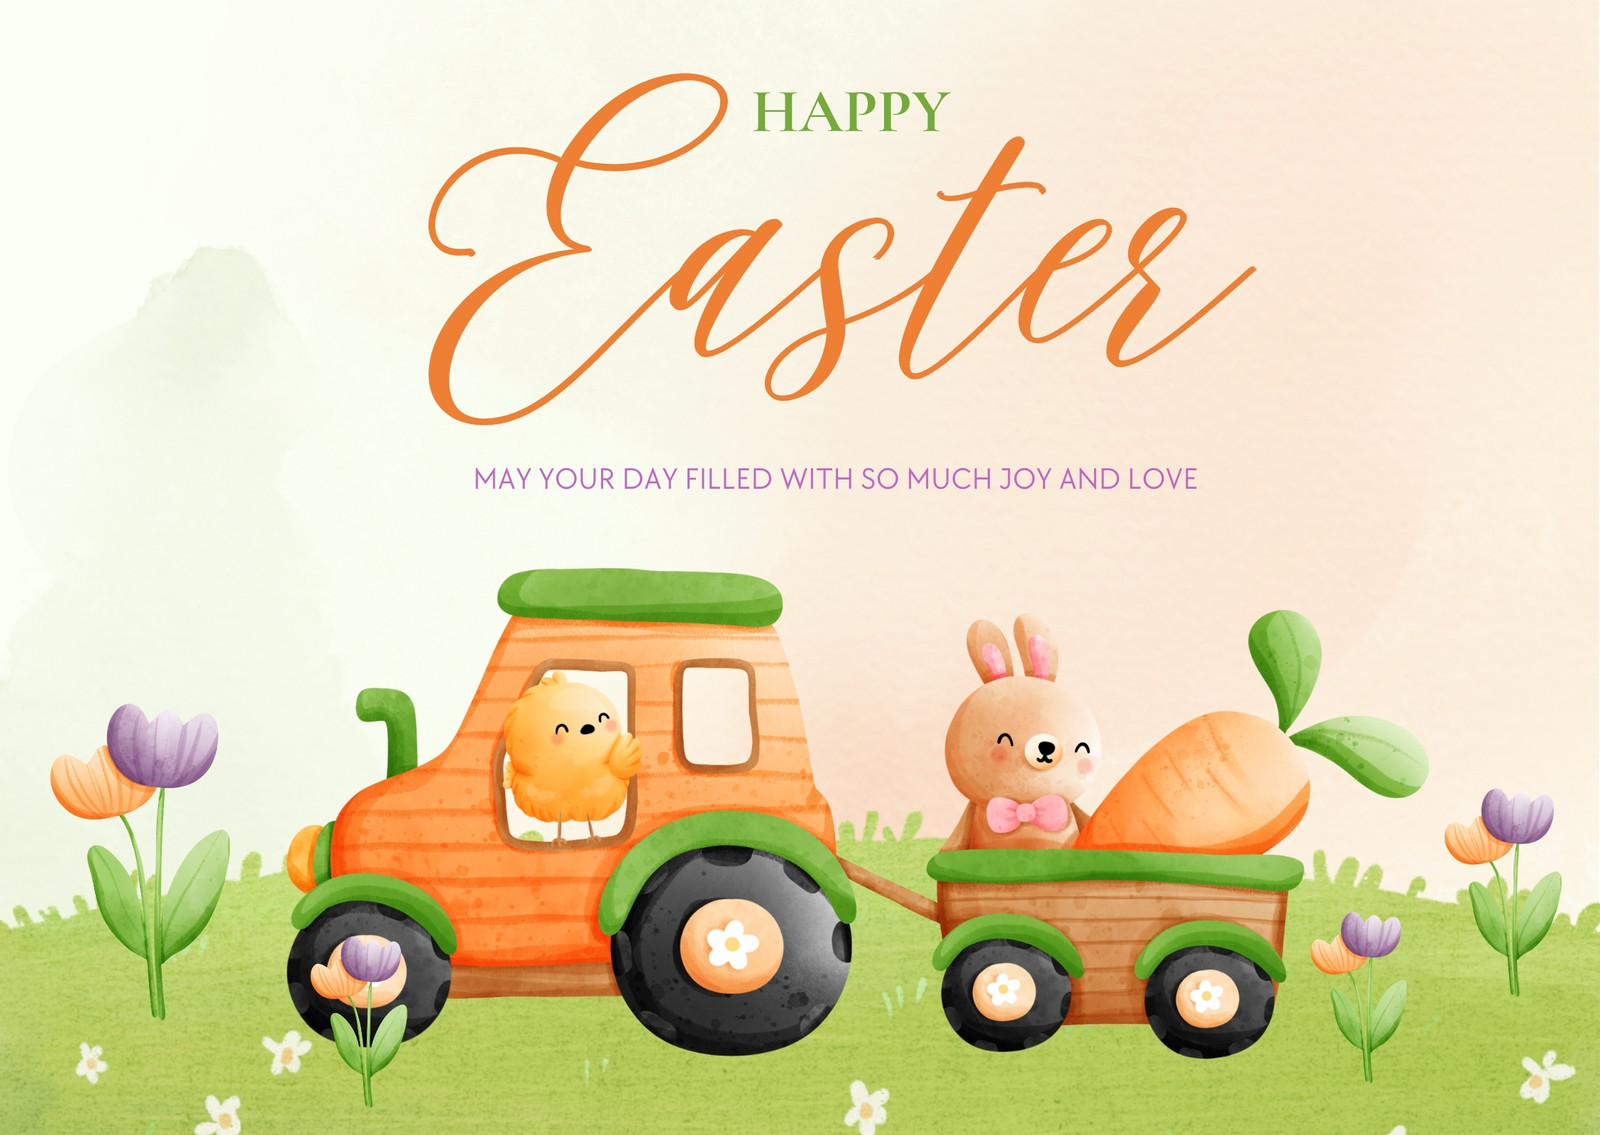 4 colorful, printable Easter cards to give to friends and family